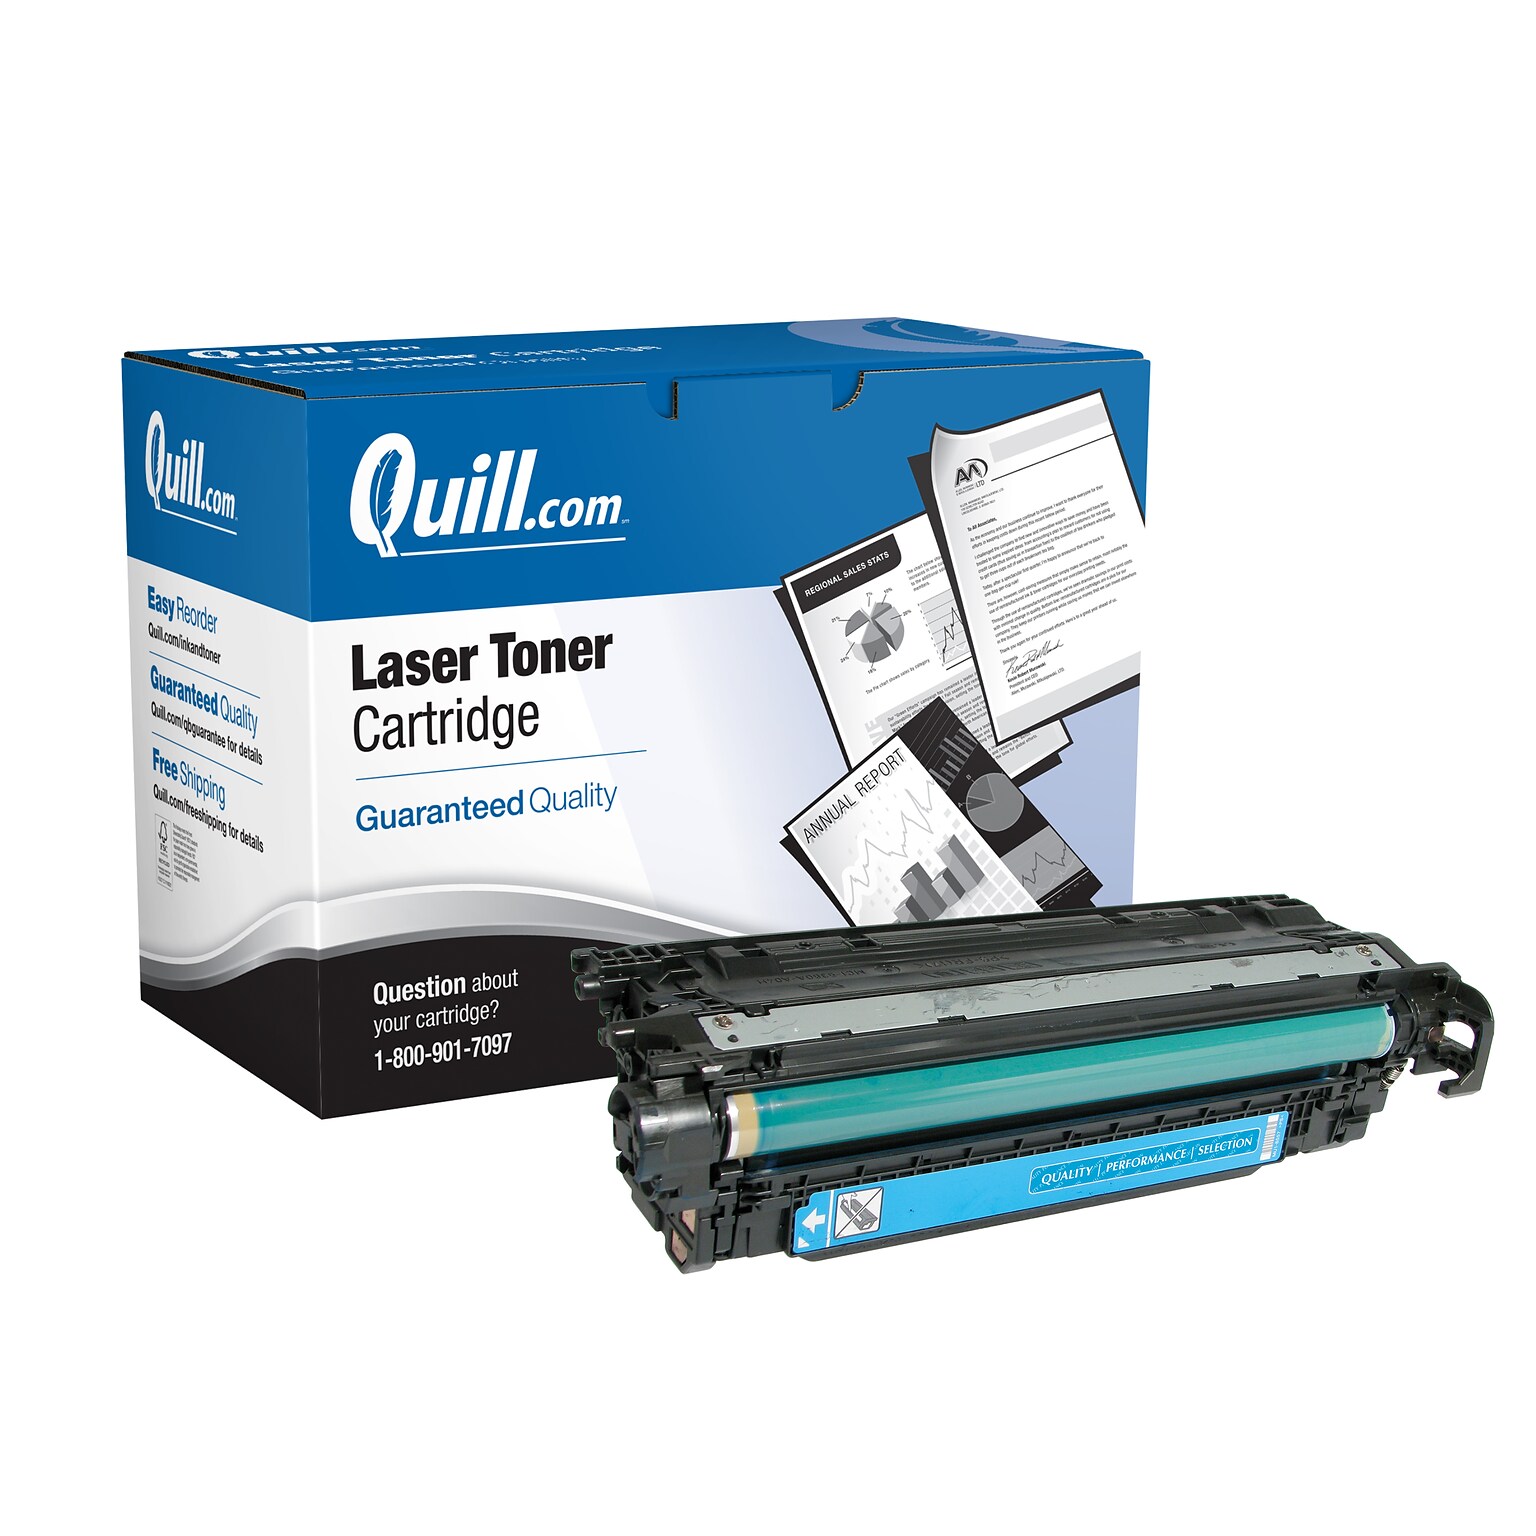 Quill Brand® Remanufactured Cyan Standard Yield Toner Cartridge Replacement for HP 507A (CE401A) (Lifetime Warranty)